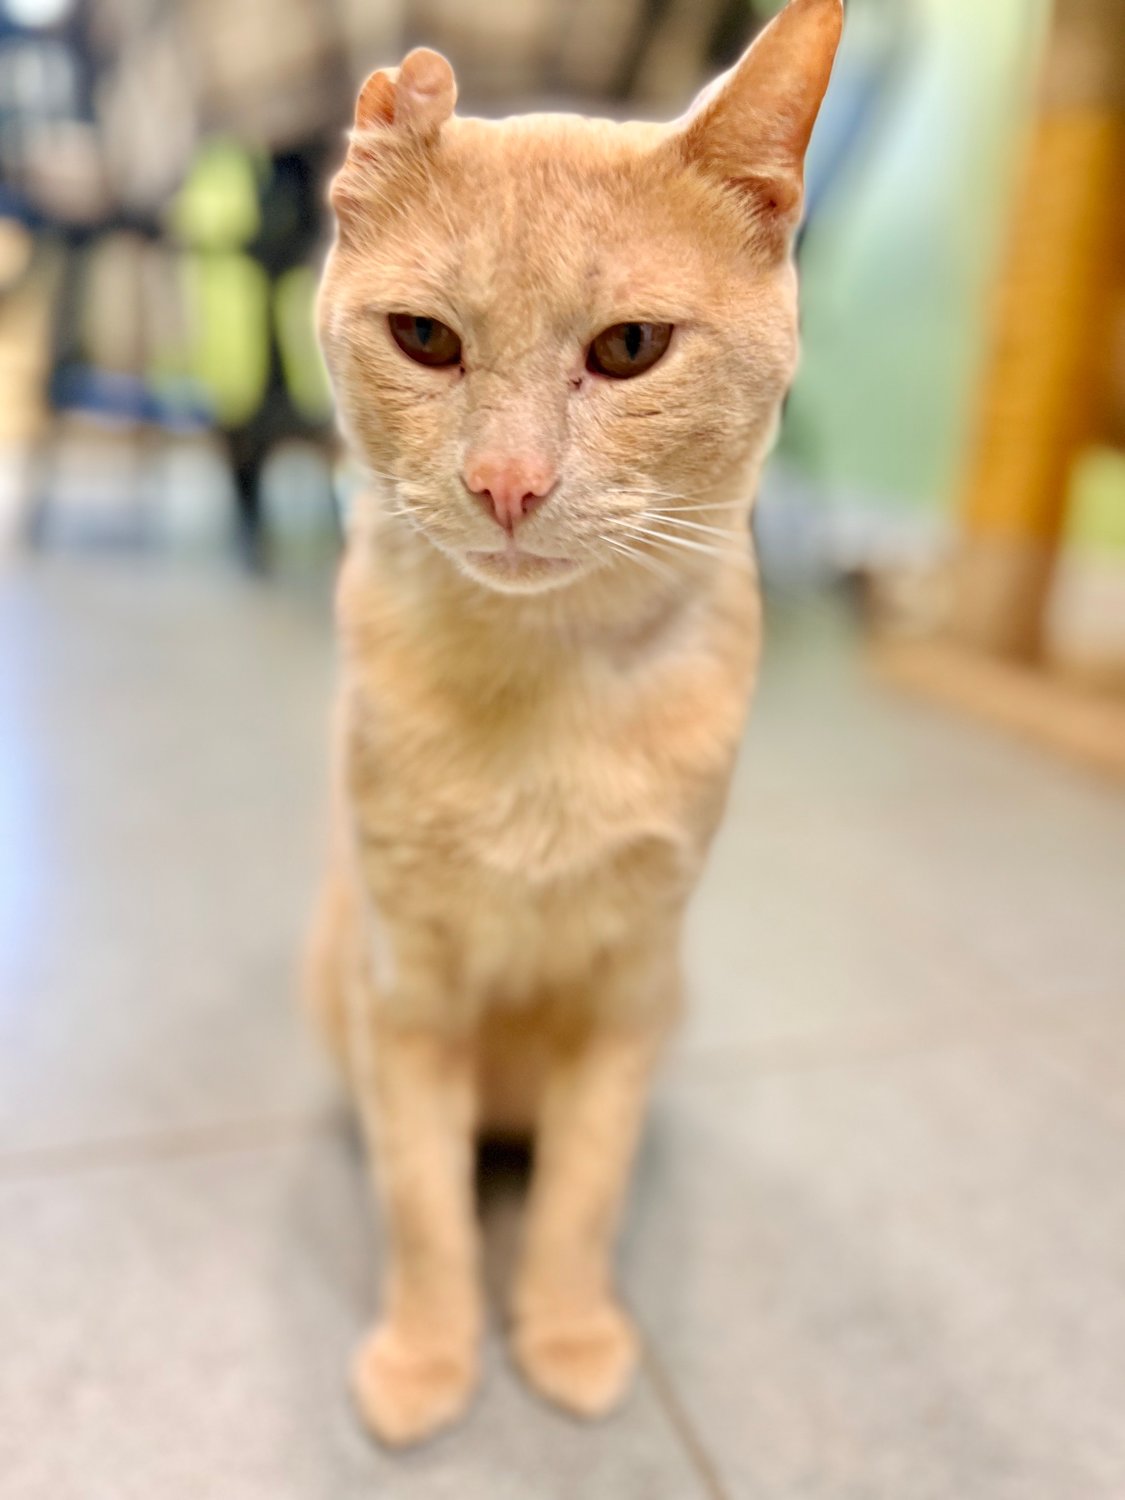 Meet Nacho — he is 8 years old and just as sweet as he looks! Nacho came in as a stray very thin and covered in fleas. His right ear looks a little different from a prior hematoma, most likely from some type of injury. It is healed and his ear will stay that way, but he is beautiful just the way he is! Despite whatever Nacho has been through, he is just as sweet as can be. He loves people and getting attention. He lives in our front office area with many other cats and he does not mind them at all. Nacho is neutered, current on vaccines, and microchipped. His adoption fee is $80. Apply here to adopt: www.anitas-sshs.org/adopt/apply. Anita’s Stevens-Swan Humane Society, 5664 Horatio St., Utica, 315-738-4357, www.anitas-sshs.org.